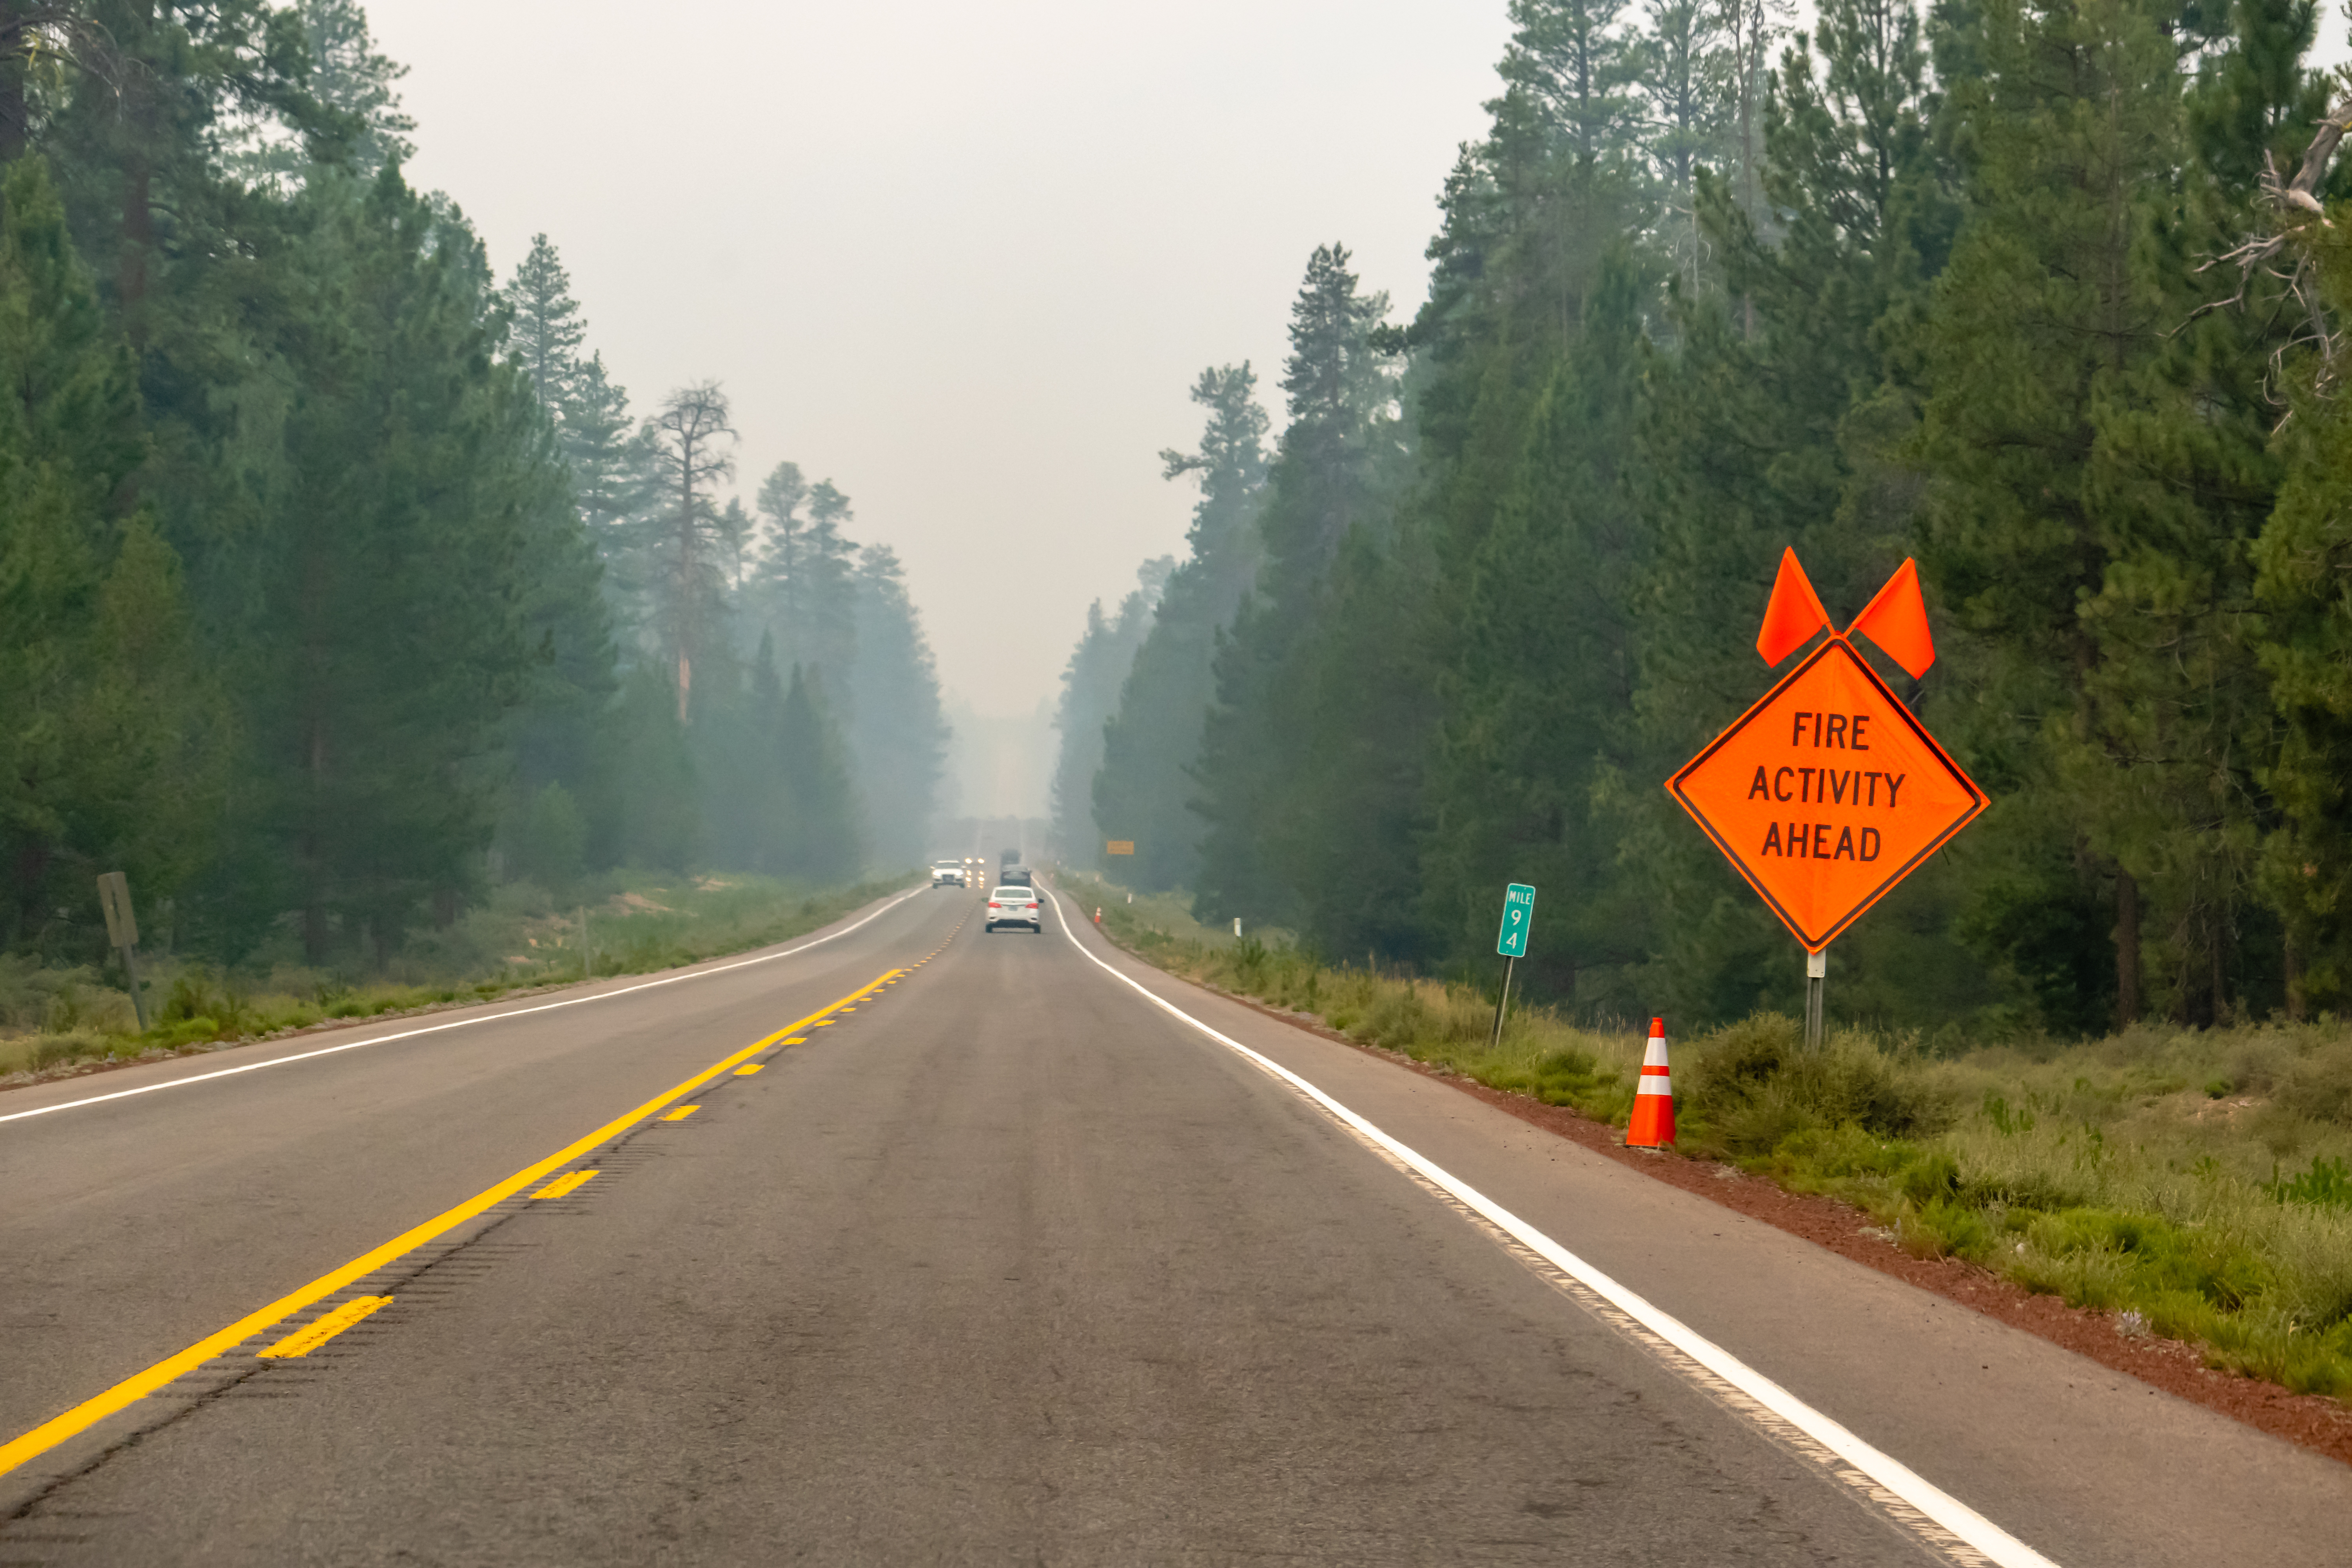 Wildfire smoke filled highway in Southern Oregon, sign at roadside "FIRE ACTIVITY AHEAD".